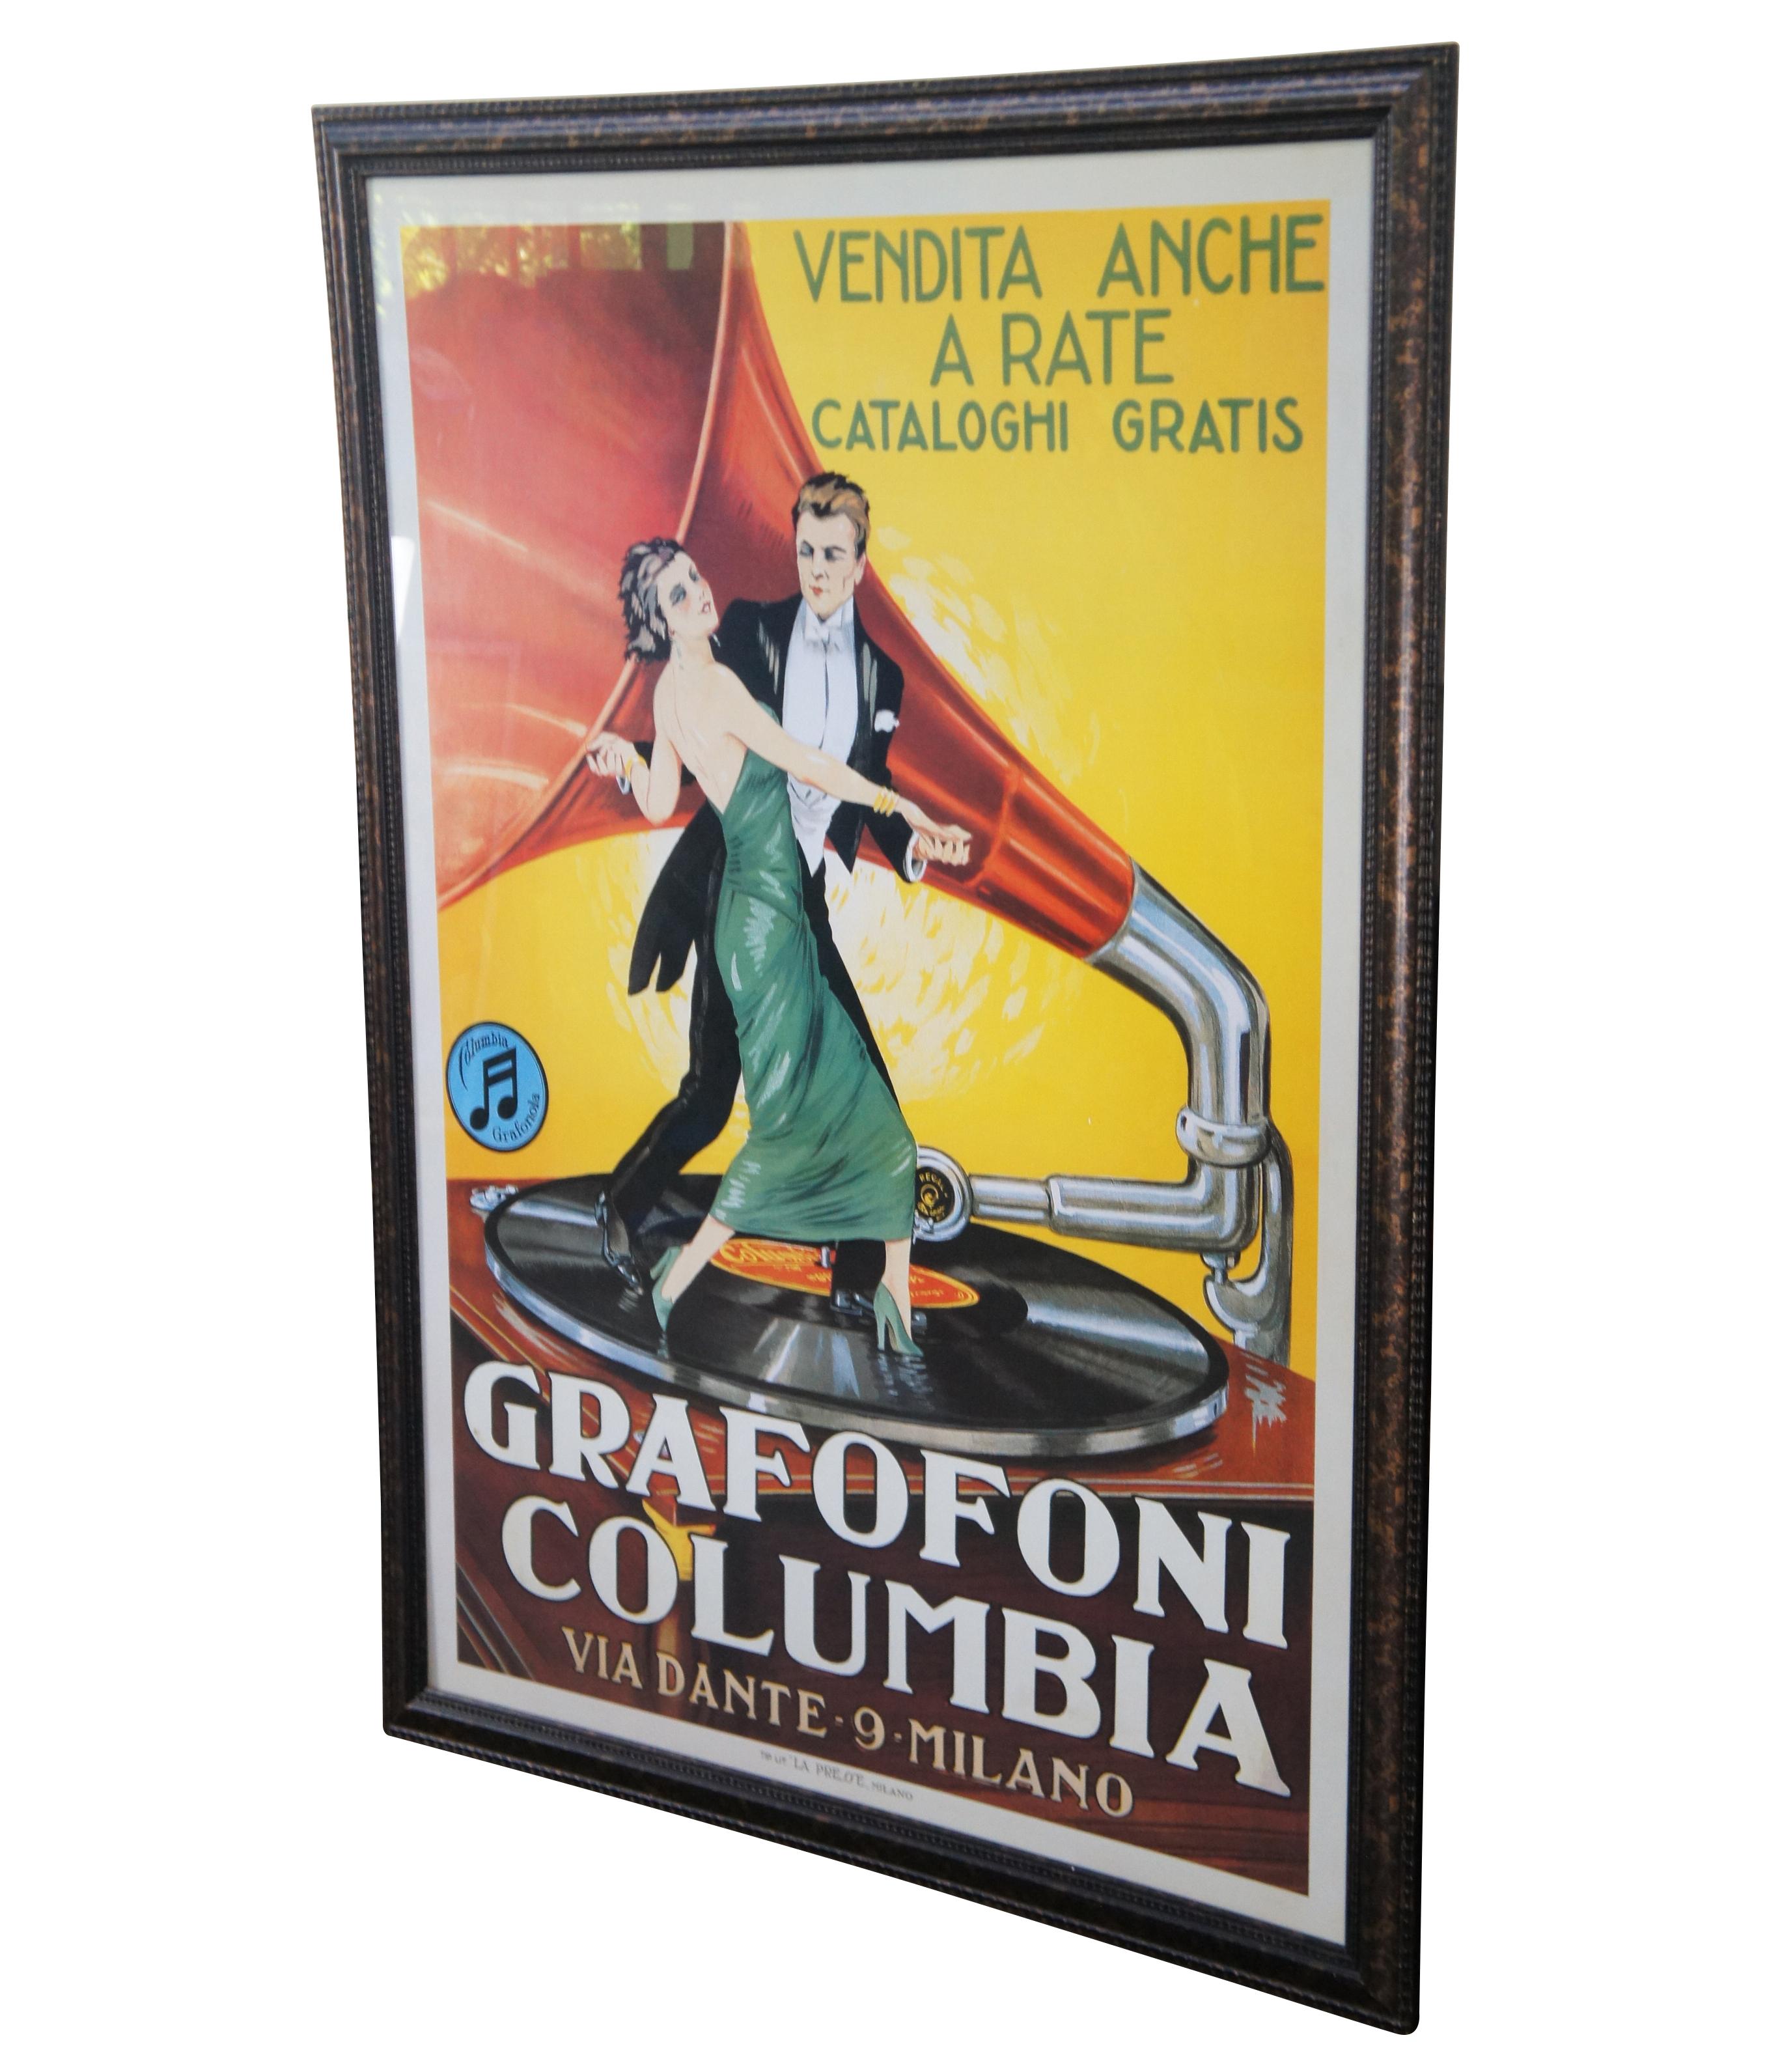 Vintage Leonetto Cappiello advertising poster for Grafofoni Columbia 1920 (Columbia Graphophone Company). It shows a couple dancing on a gramophone player. This poster was groundbreaking in its time because Leonetto Cappiello created an impressive